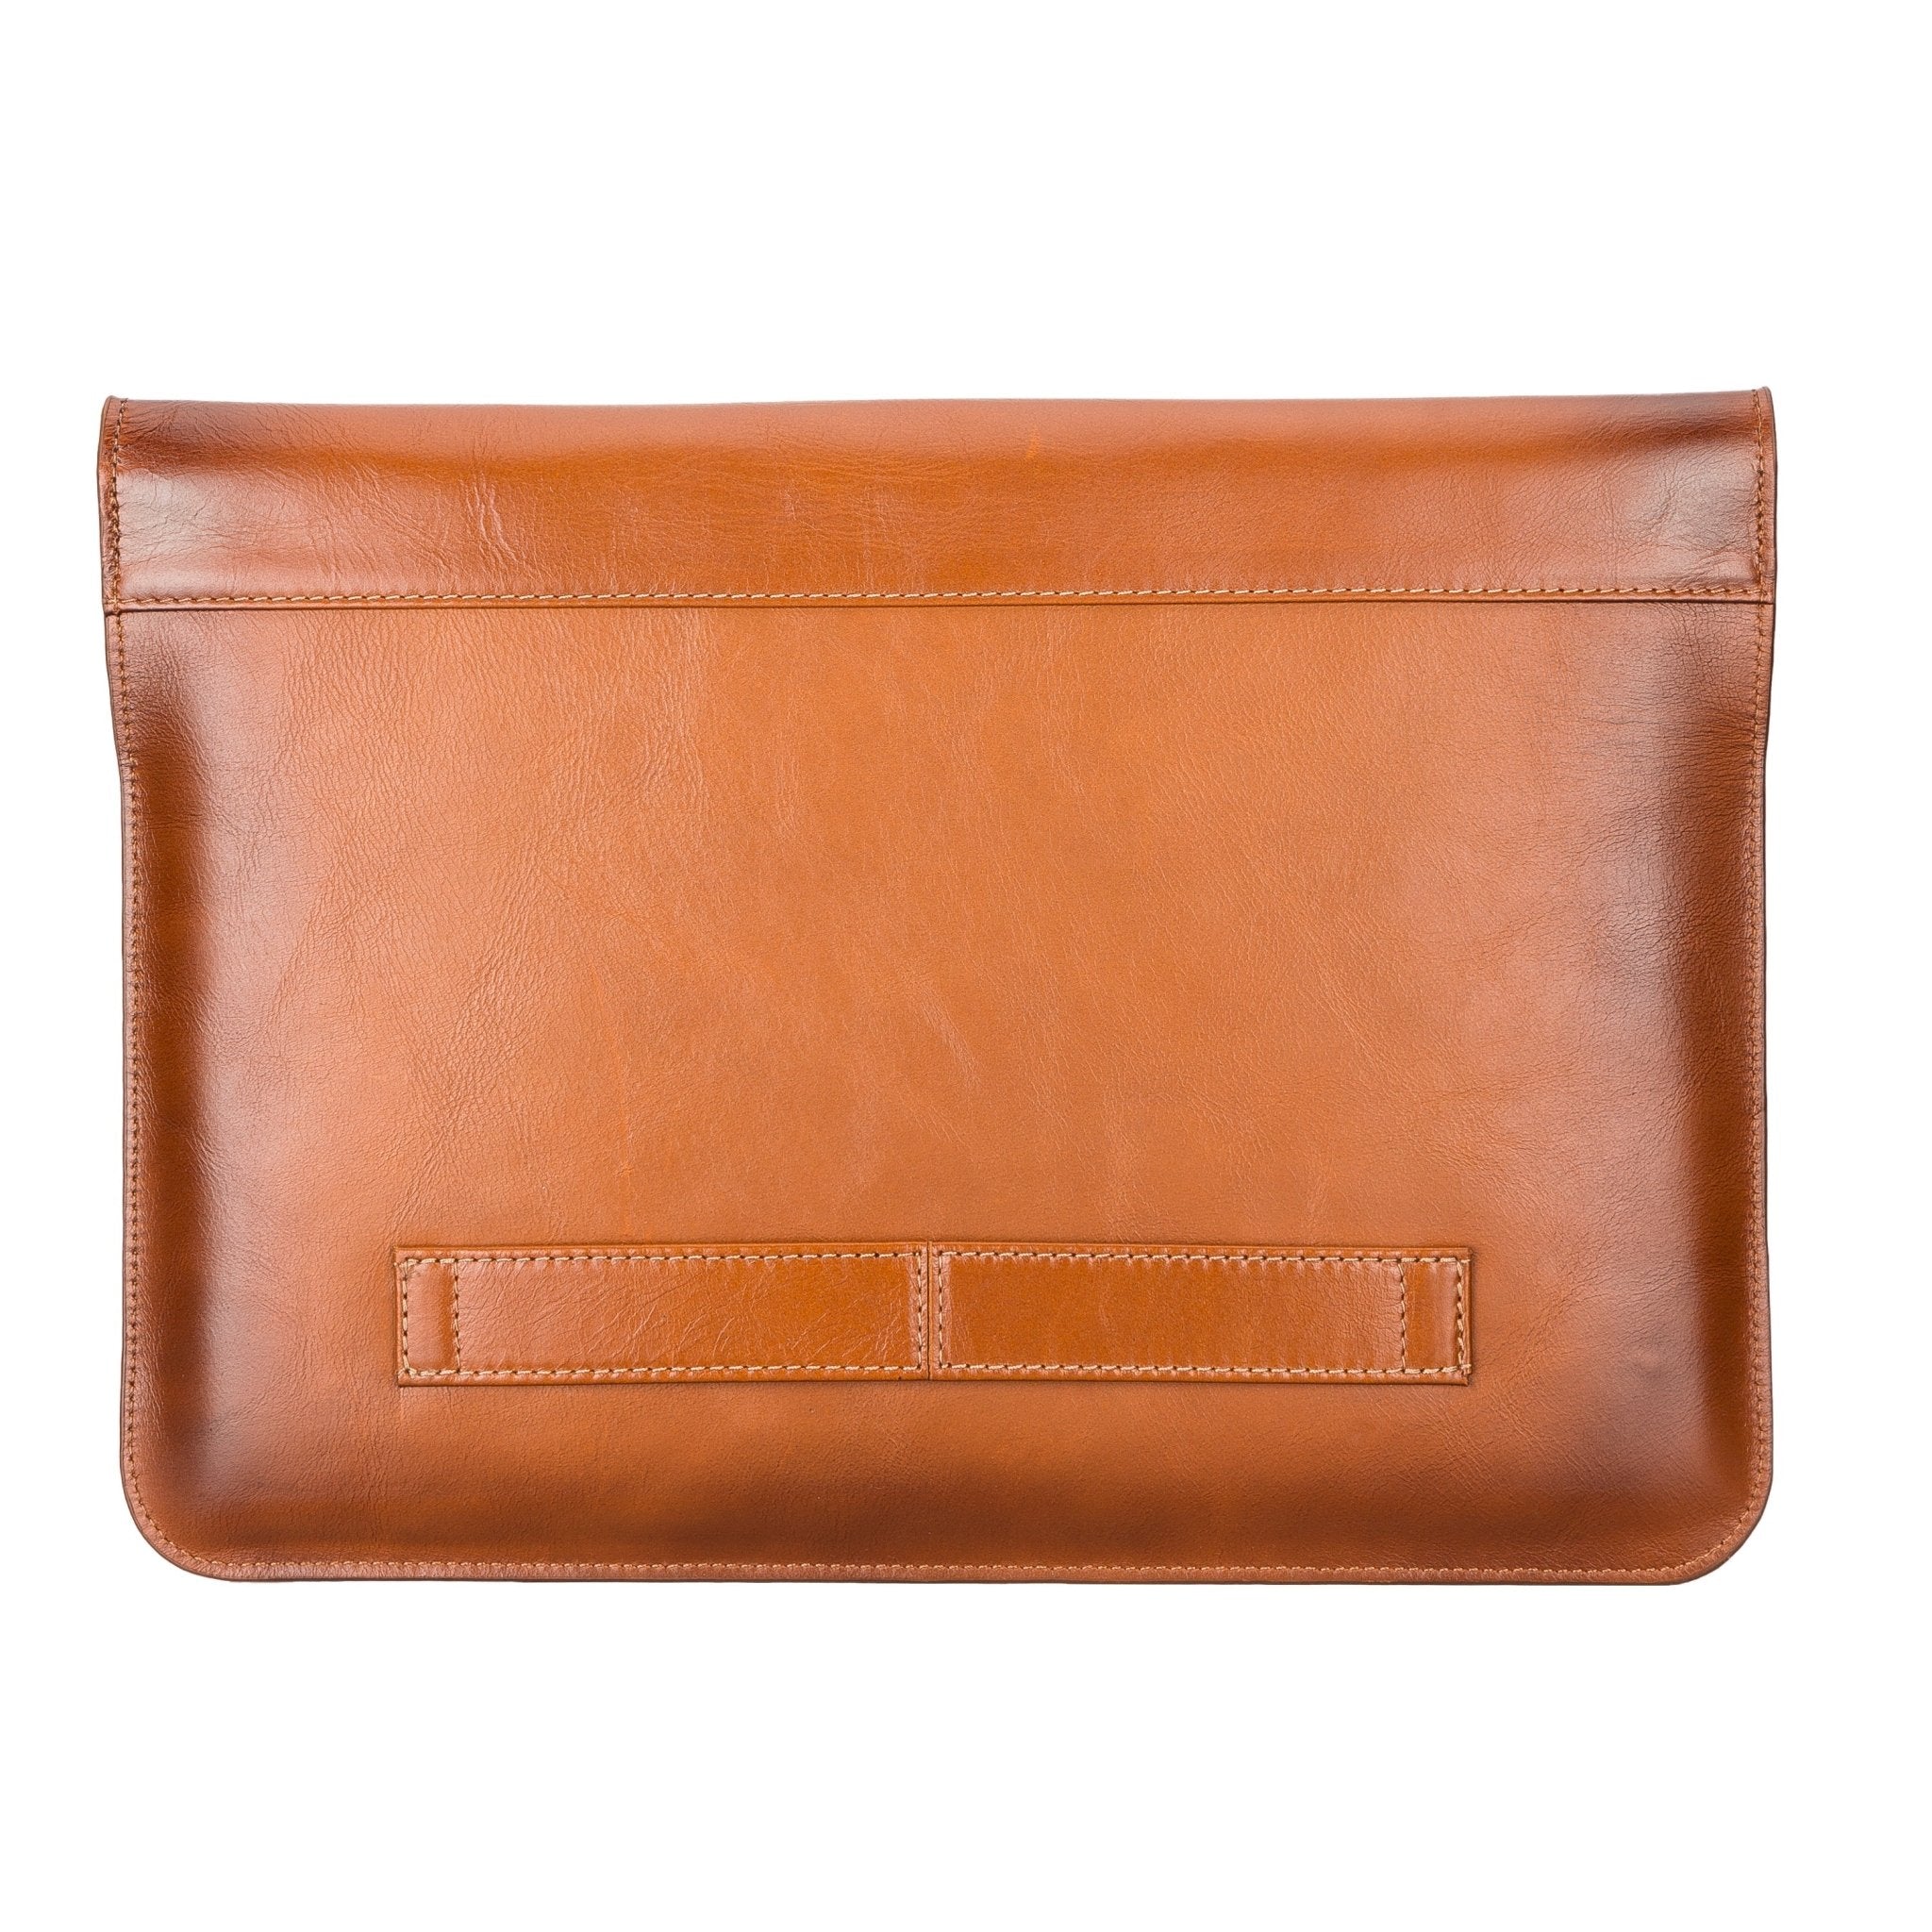 Leather Sleeve for MacBook Pro / Laptops - G - Line